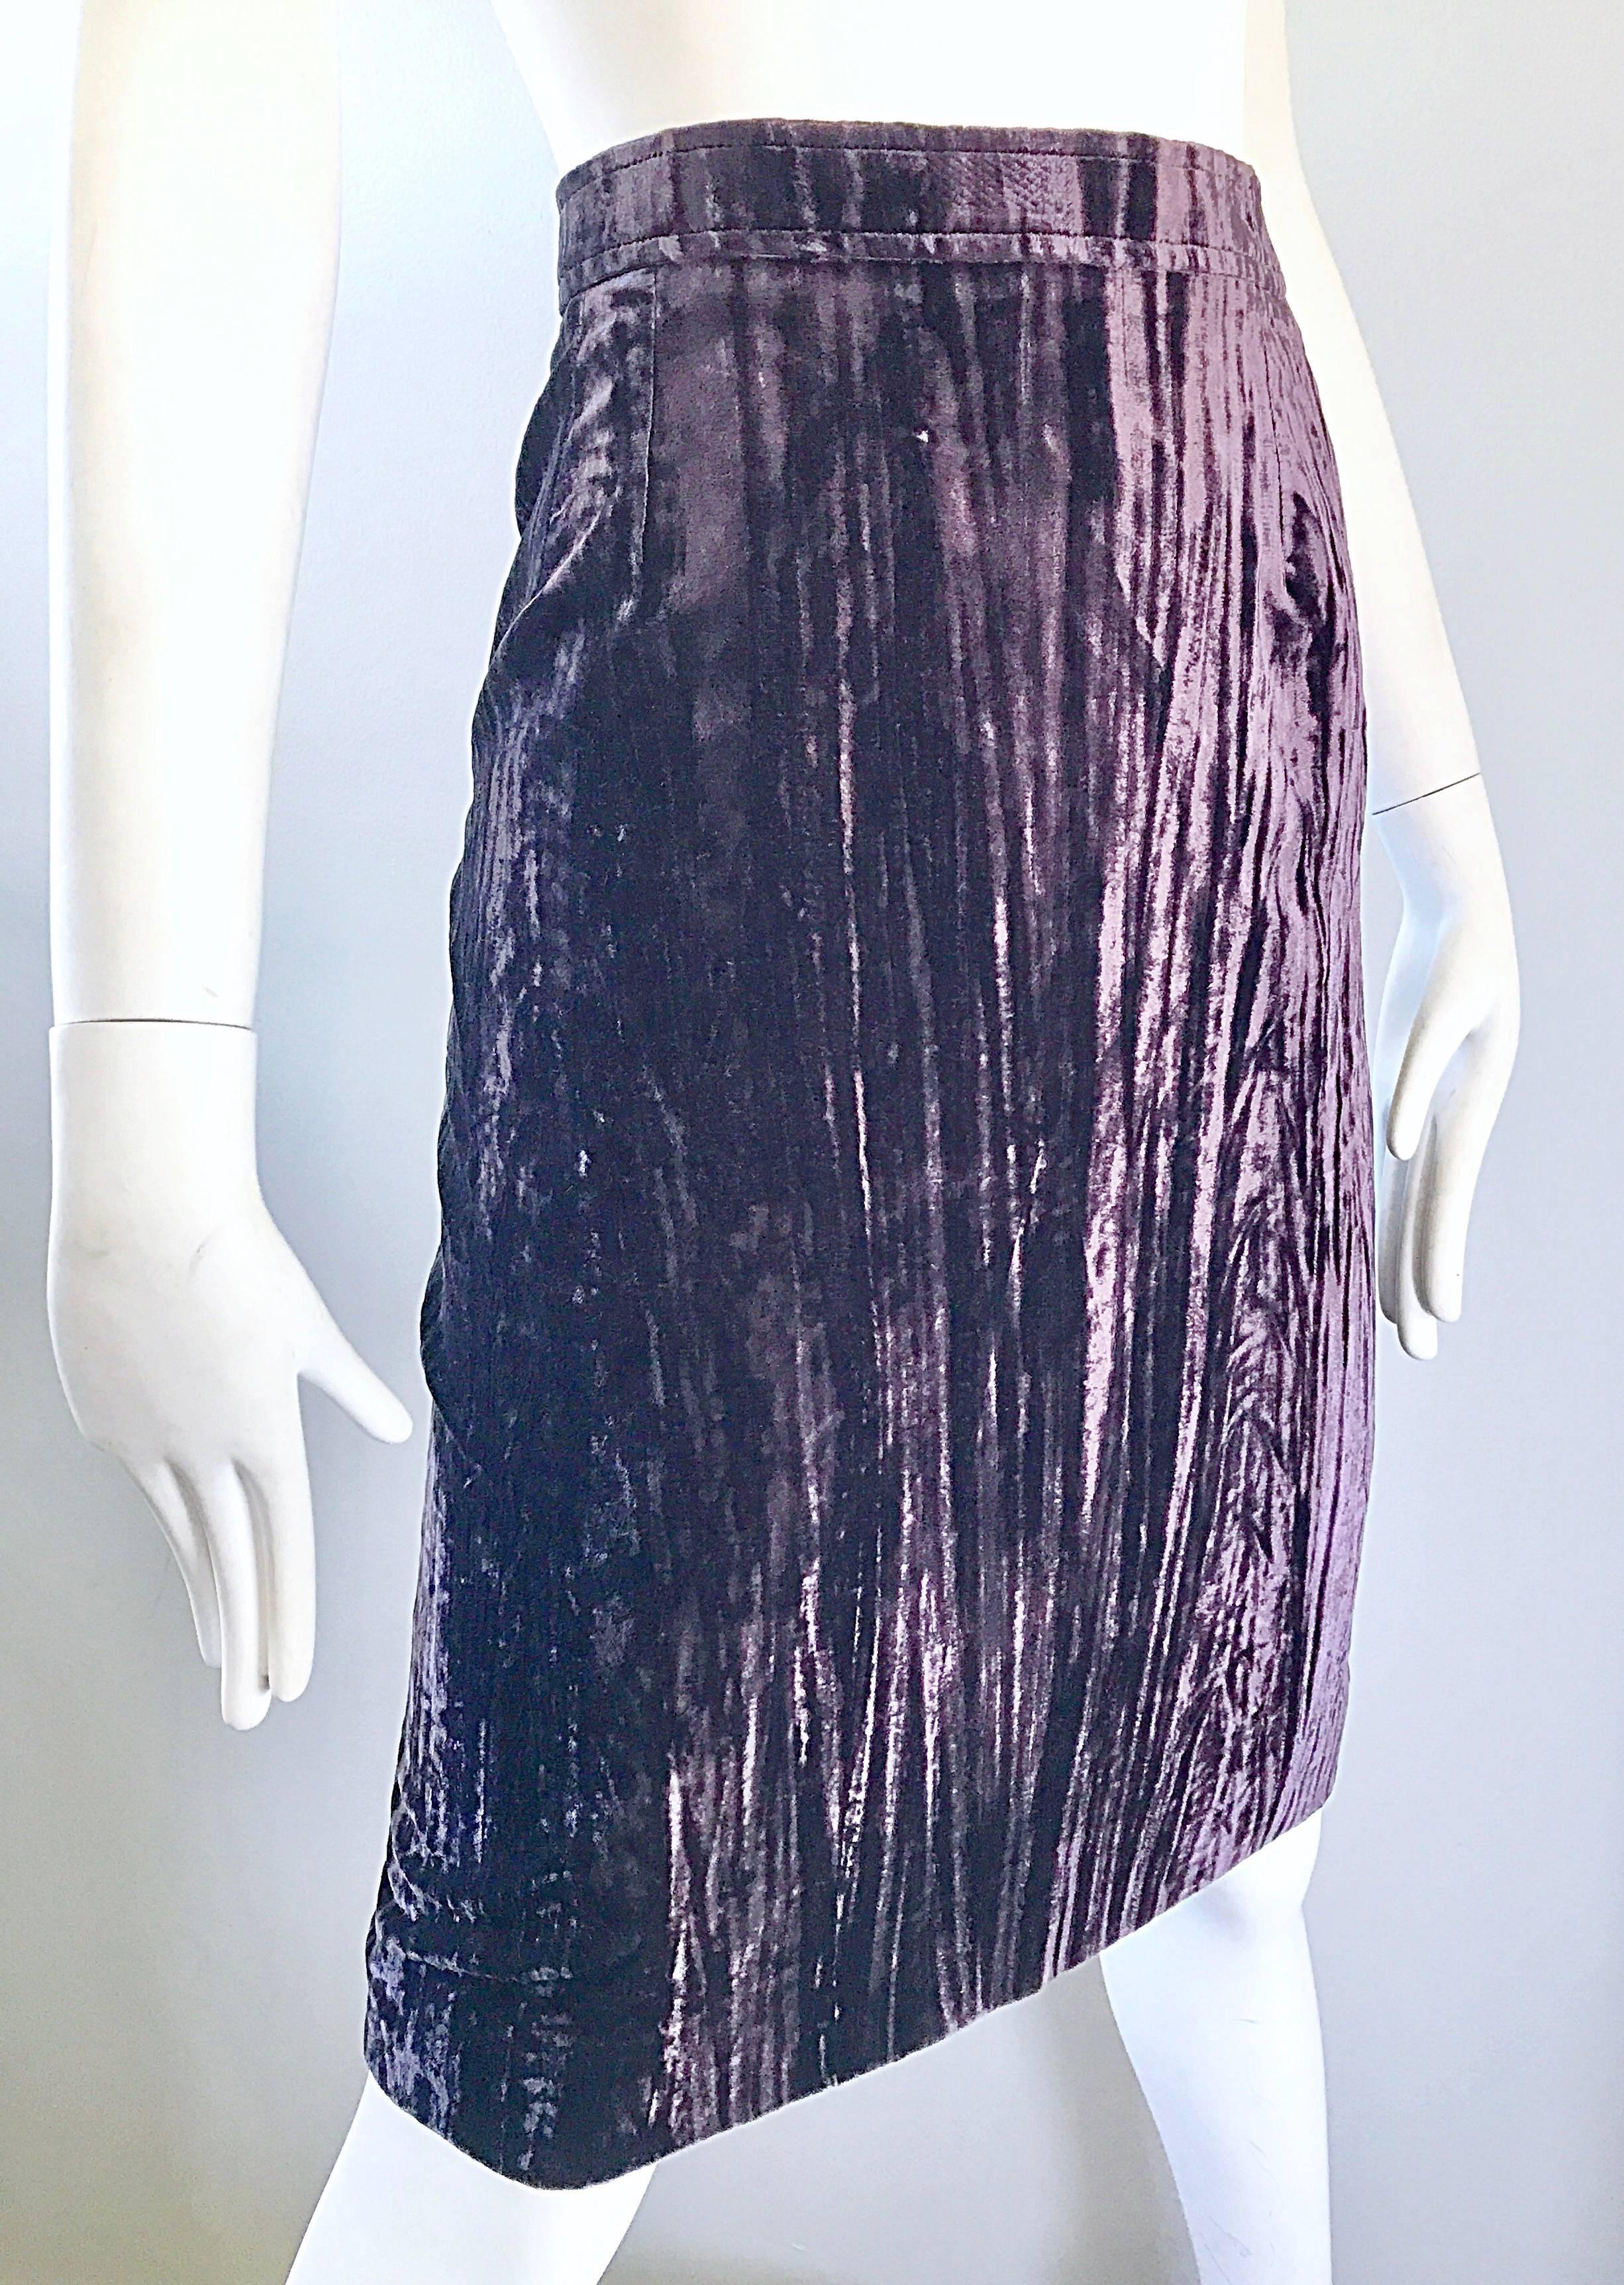 Beautiful vintage YVES SAINT LAURENT Rive Gauche high waisted purple lavender pencil skirt! Soft crushed velvet feels luxurious against the skin. Hidden zipper up the side with button closure. Stylish and classic fit that is a timeless addition to